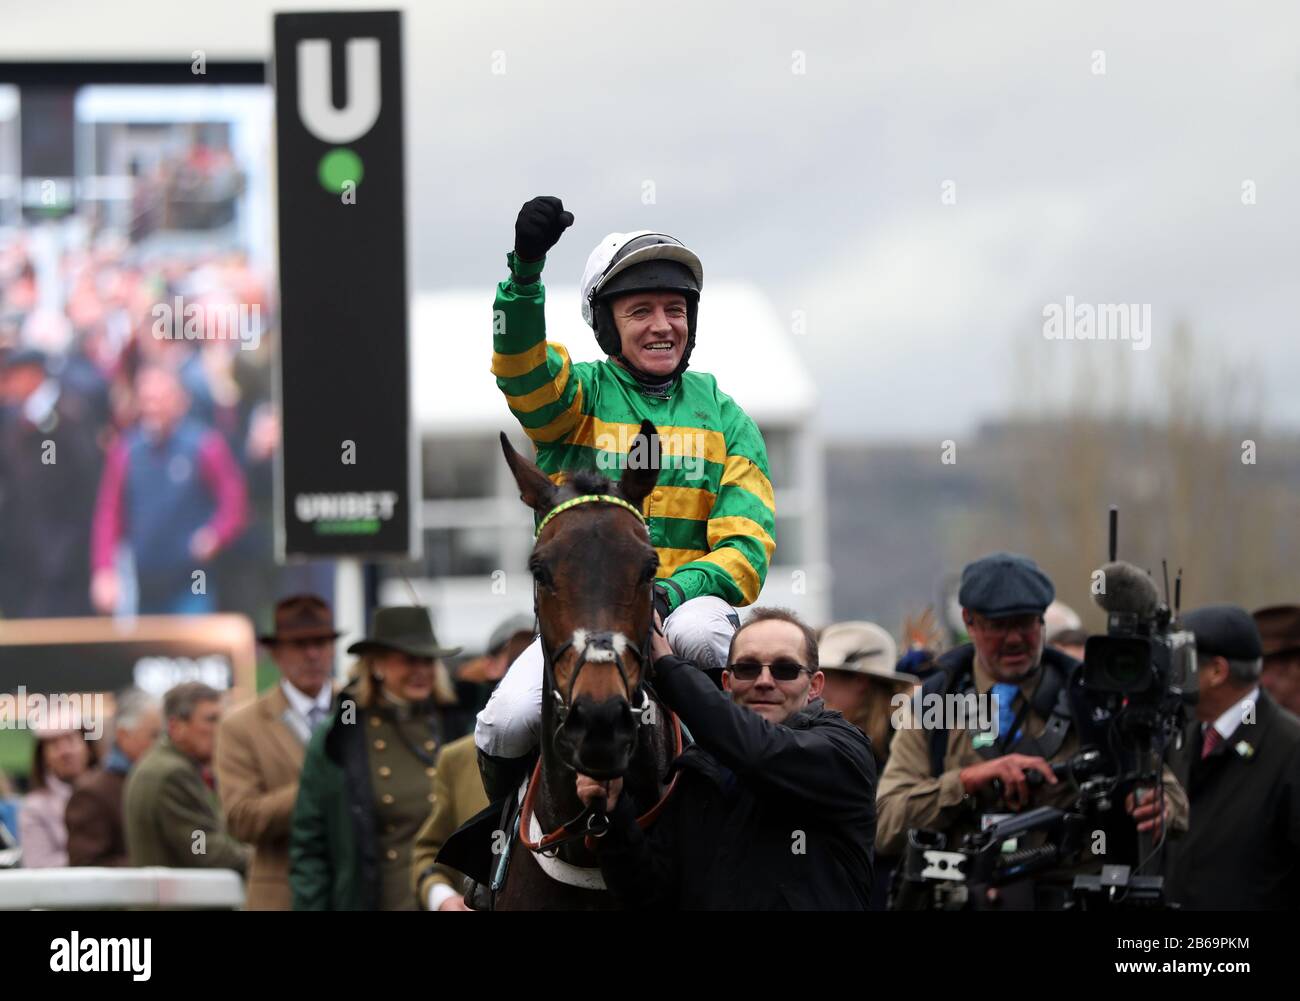 Barry Geraghty aboard Epatante following their victory in the Unibet Champion Hurdle Challenge Trophy on day one of the Cheltenham Festival at Cheltenham Racecourse, Cheltenham. Stock Photo